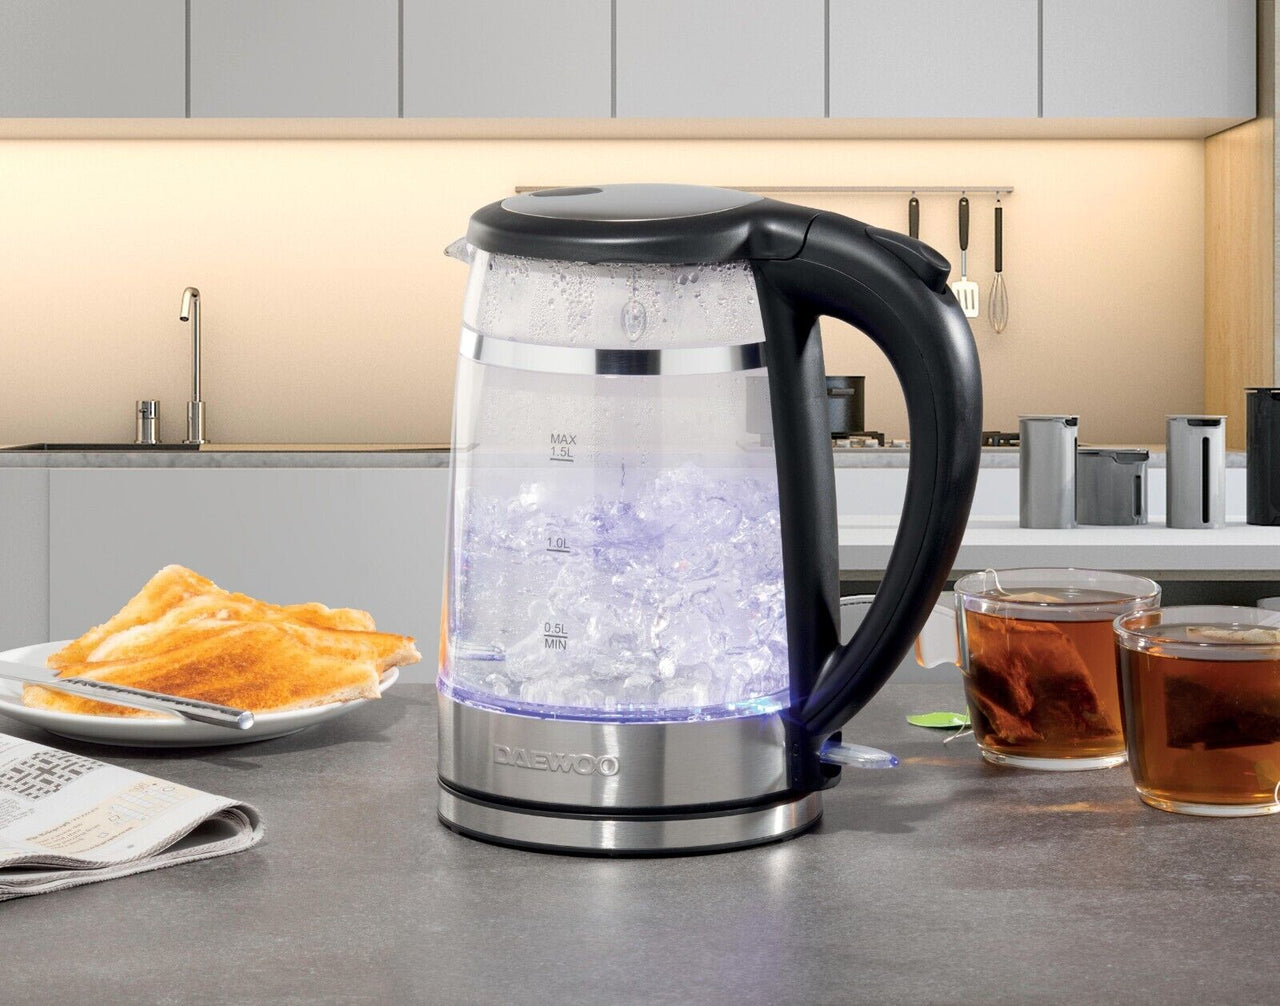 Daewoo 1.7L 3KW Glass Kettle, 2 Slice Glass Toaster & 20L 700W Microwave. Matching Set in Silver Stainless Steel & Glass